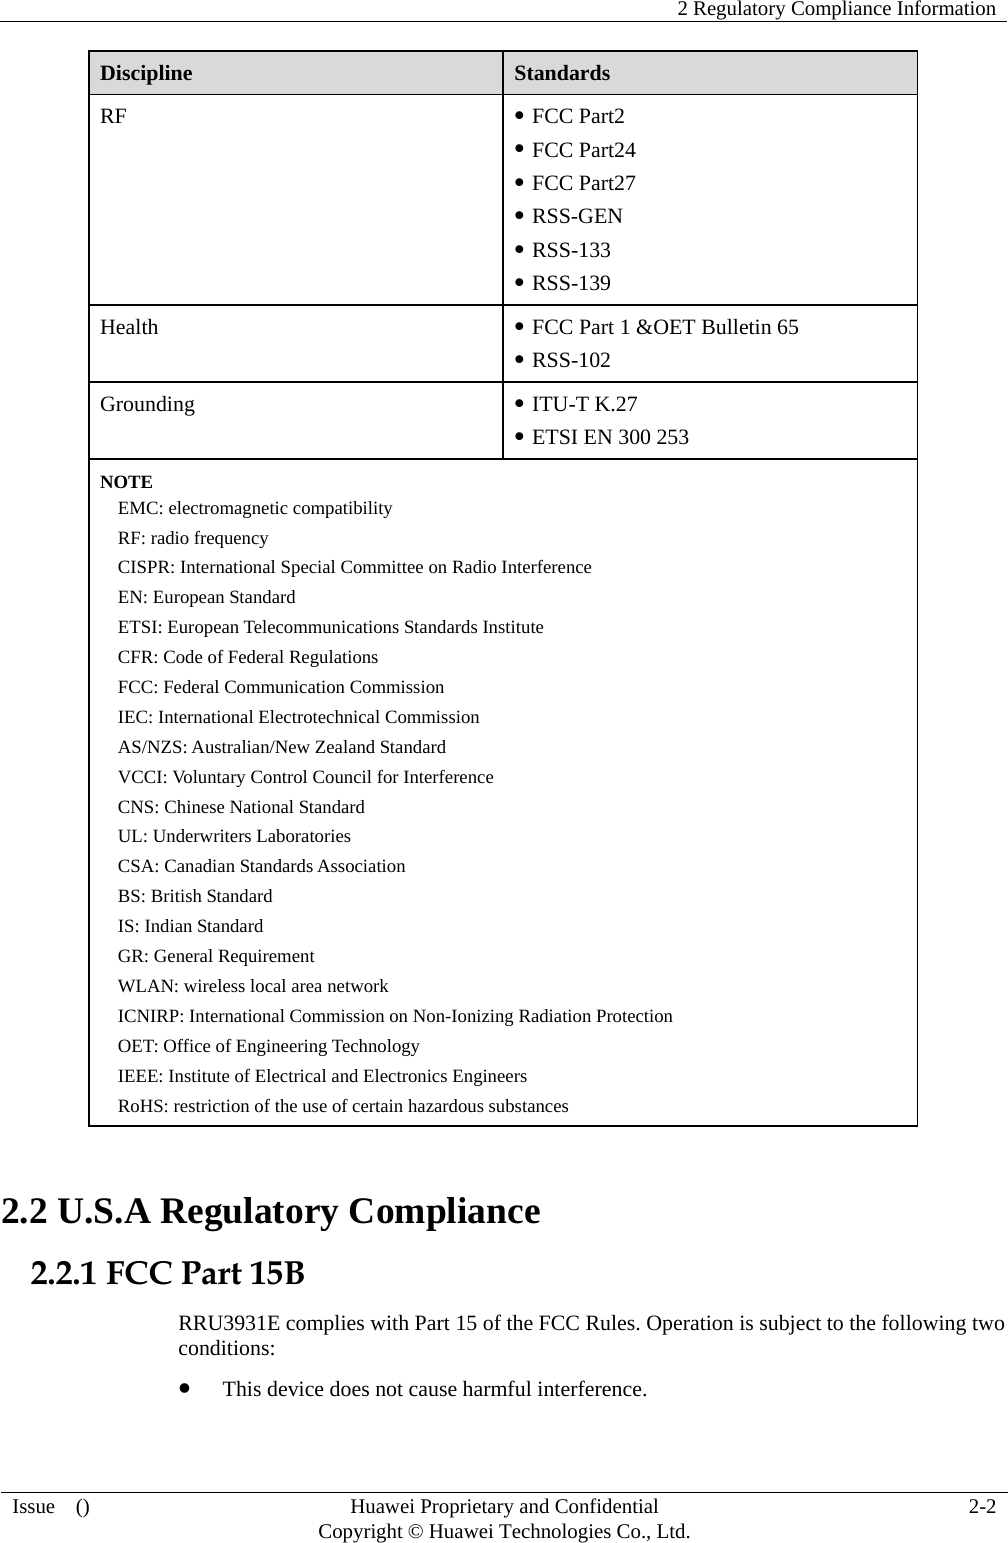    2 Regulatory Compliance Information Issue  ()  Huawei Proprietary and Confidential     Copyright © Huawei Technologies Co., Ltd. 2-2 Discipline  Standards RF  z FCC Part2 z FCC Part24 z FCC Part27 z RSS-GEN z RSS-133 z RSS-139 Health  z FCC Part 1 &amp;OET Bulletin 65 z RSS-102 Grounding  z ITU-T K.27 z ETSI EN 300 253 NOTE EMC: electromagnetic compatibility RF: radio frequency CISPR: International Special Committee on Radio Interference EN: European Standard ETSI: European Telecommunications Standards Institute CFR: Code of Federal Regulations FCC: Federal Communication Commission IEC: International Electrotechnical Commission AS/NZS: Australian/New Zealand Standard VCCI: Voluntary Control Council for Interference CNS: Chinese National Standard UL: Underwriters Laboratories CSA: Canadian Standards Association BS: British Standard IS: Indian Standard GR: General Requirement WLAN: wireless local area network ICNIRP: International Commission on Non-Ionizing Radiation Protection OET: Office of Engineering Technology IEEE: Institute of Electrical and Electronics Engineers RoHS: restriction of the use of certain hazardous substances 2.2 U.S.A Regulatory Compliance 2.2.1 FCC Part 15B RRU3931E complies with Part 15 of the FCC Rules. Operation is subject to the following two conditions: z This device does not cause harmful interference. 